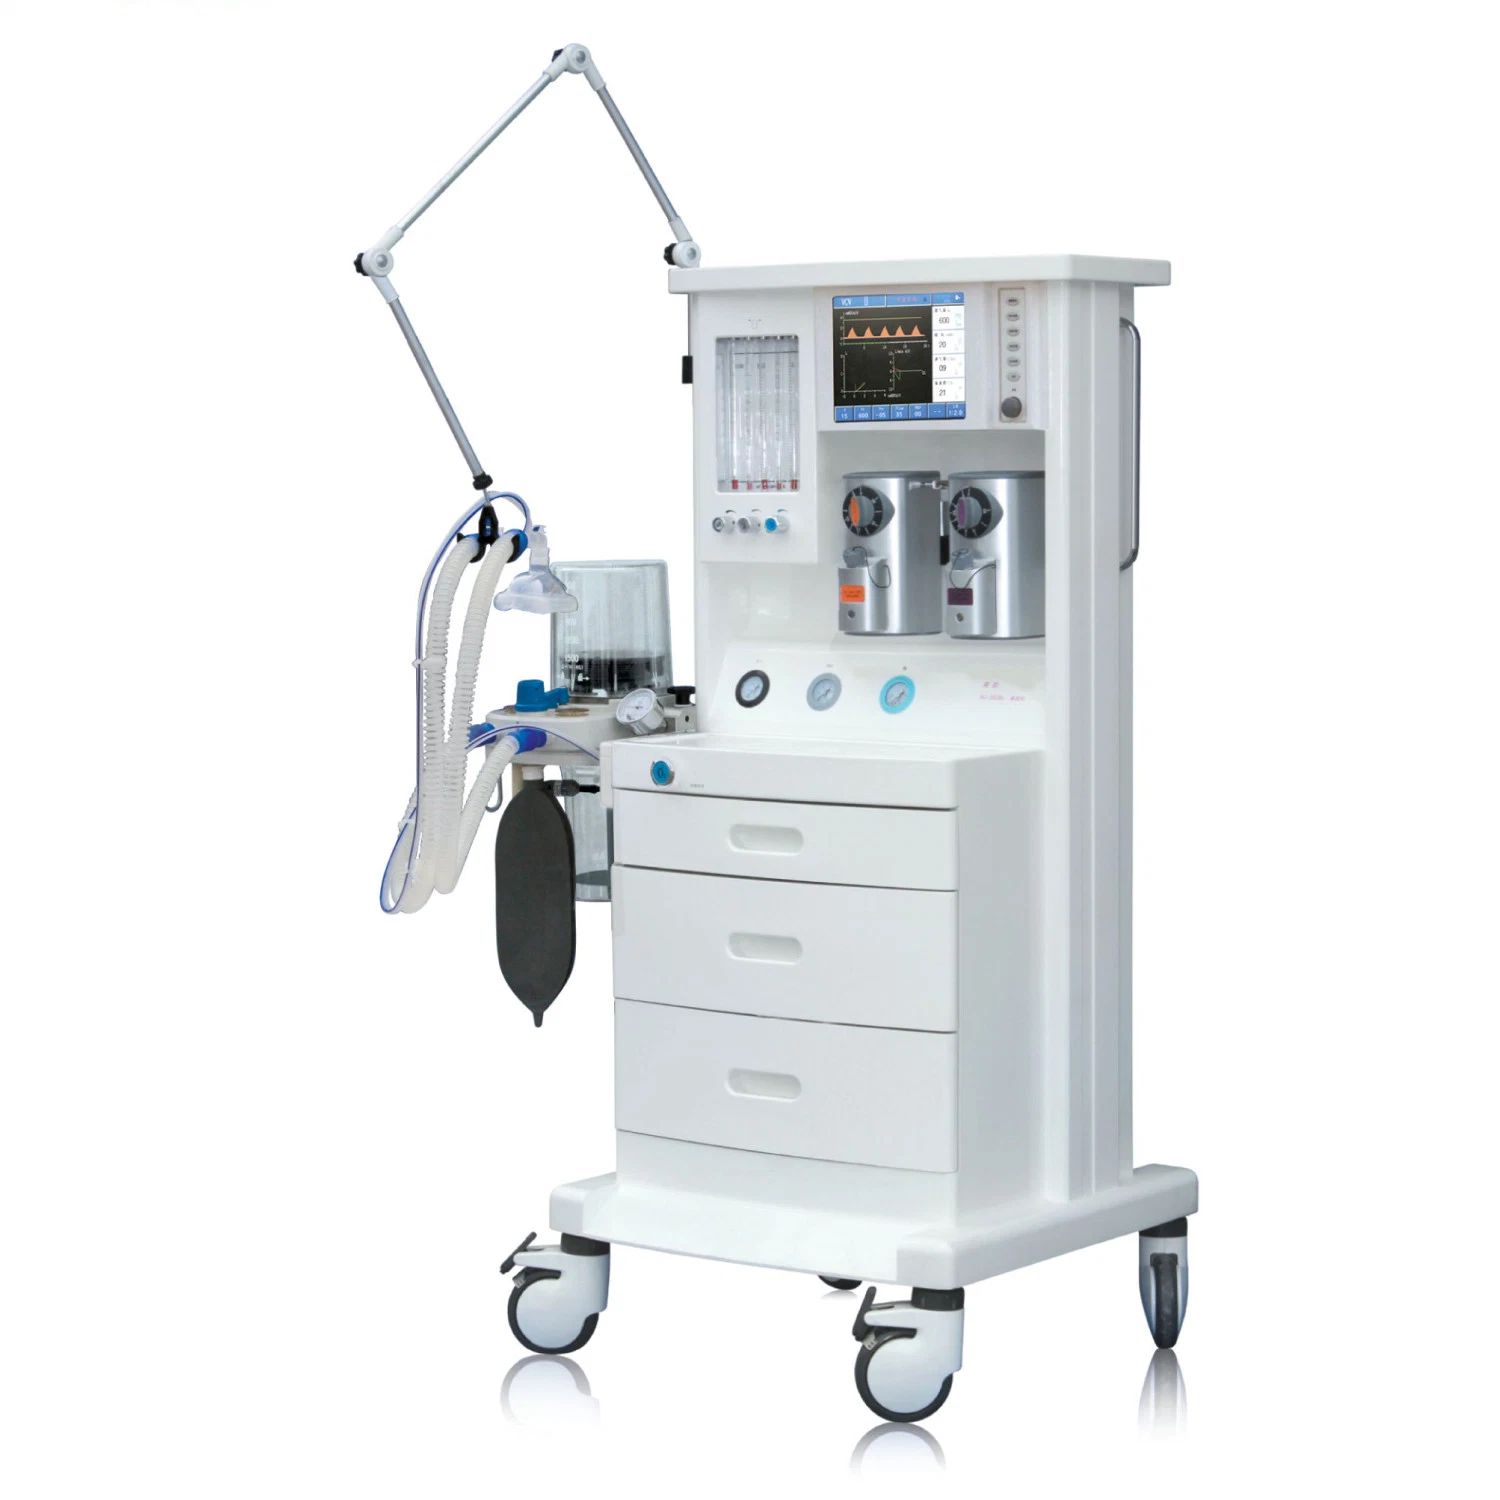 Portable Medical Surgical Room Equipment Anesthesia Machine with Ventilator and 2 Vaporizers